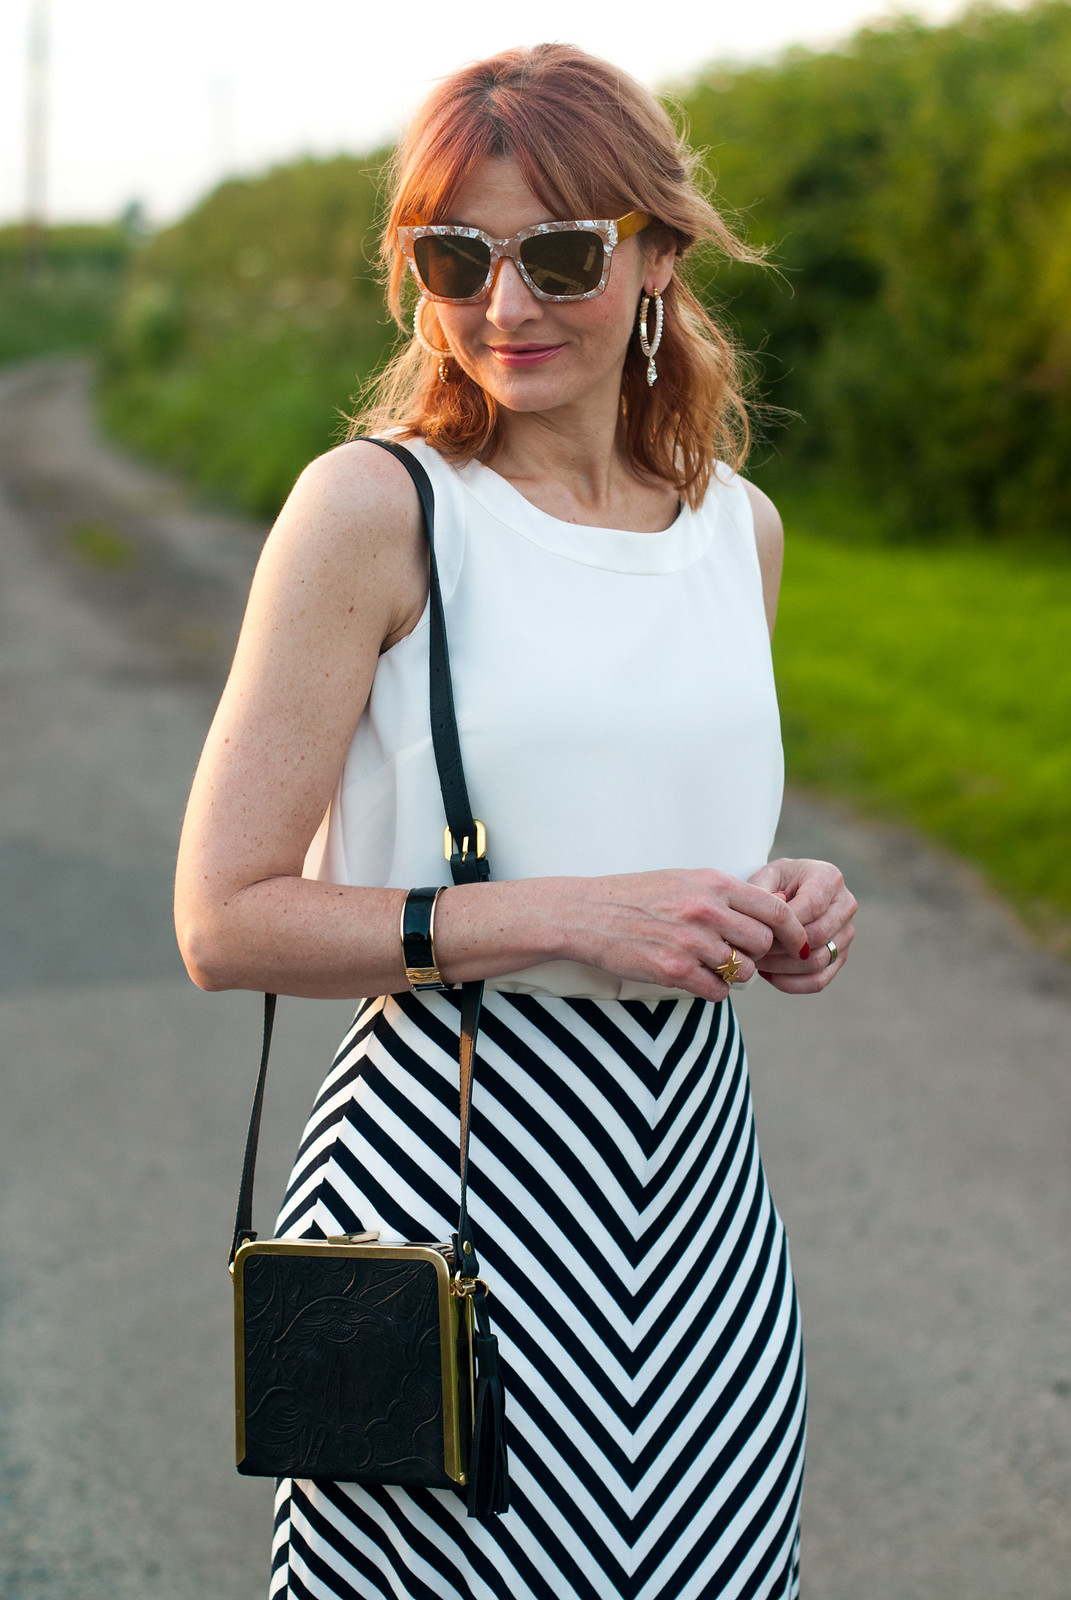 Black and white monochrome, summer style: Striped maxi skirt loose white sleeveless blouse, red lace-up espadrilles statement sunglasses and earrings | Not Dressed As Lamb, over 40 style